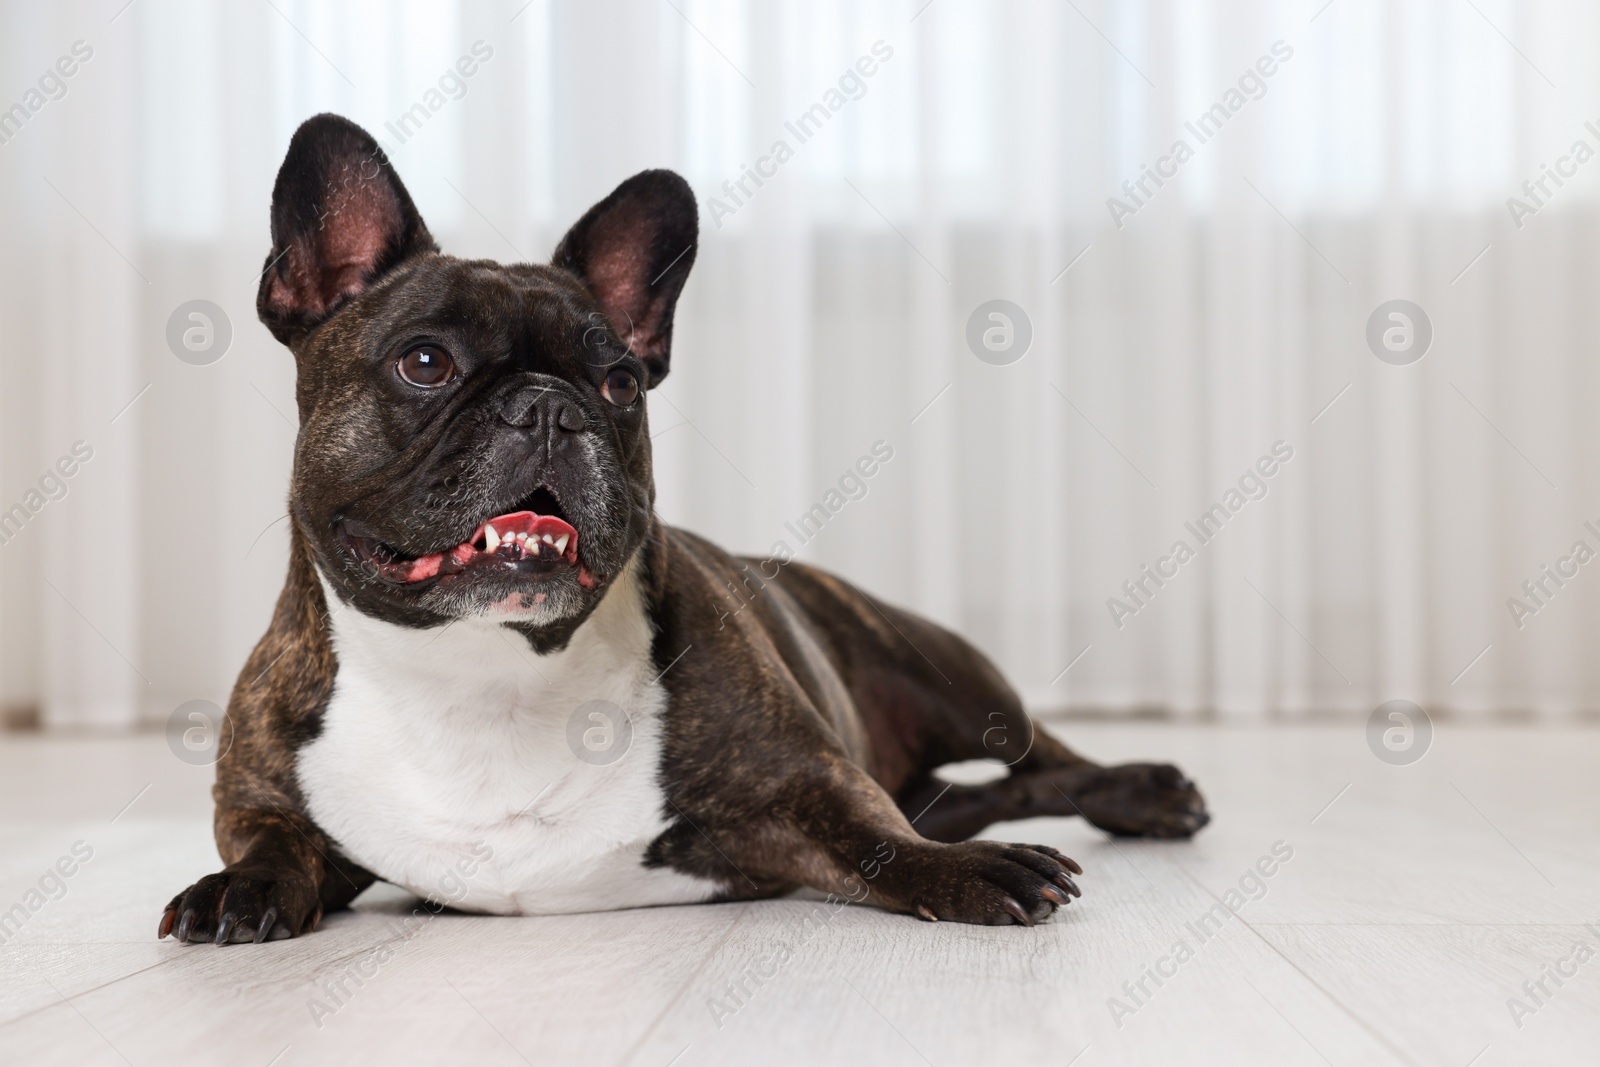 Photo of Adorable French Bulldog lying on floor indoors. Lovely pet